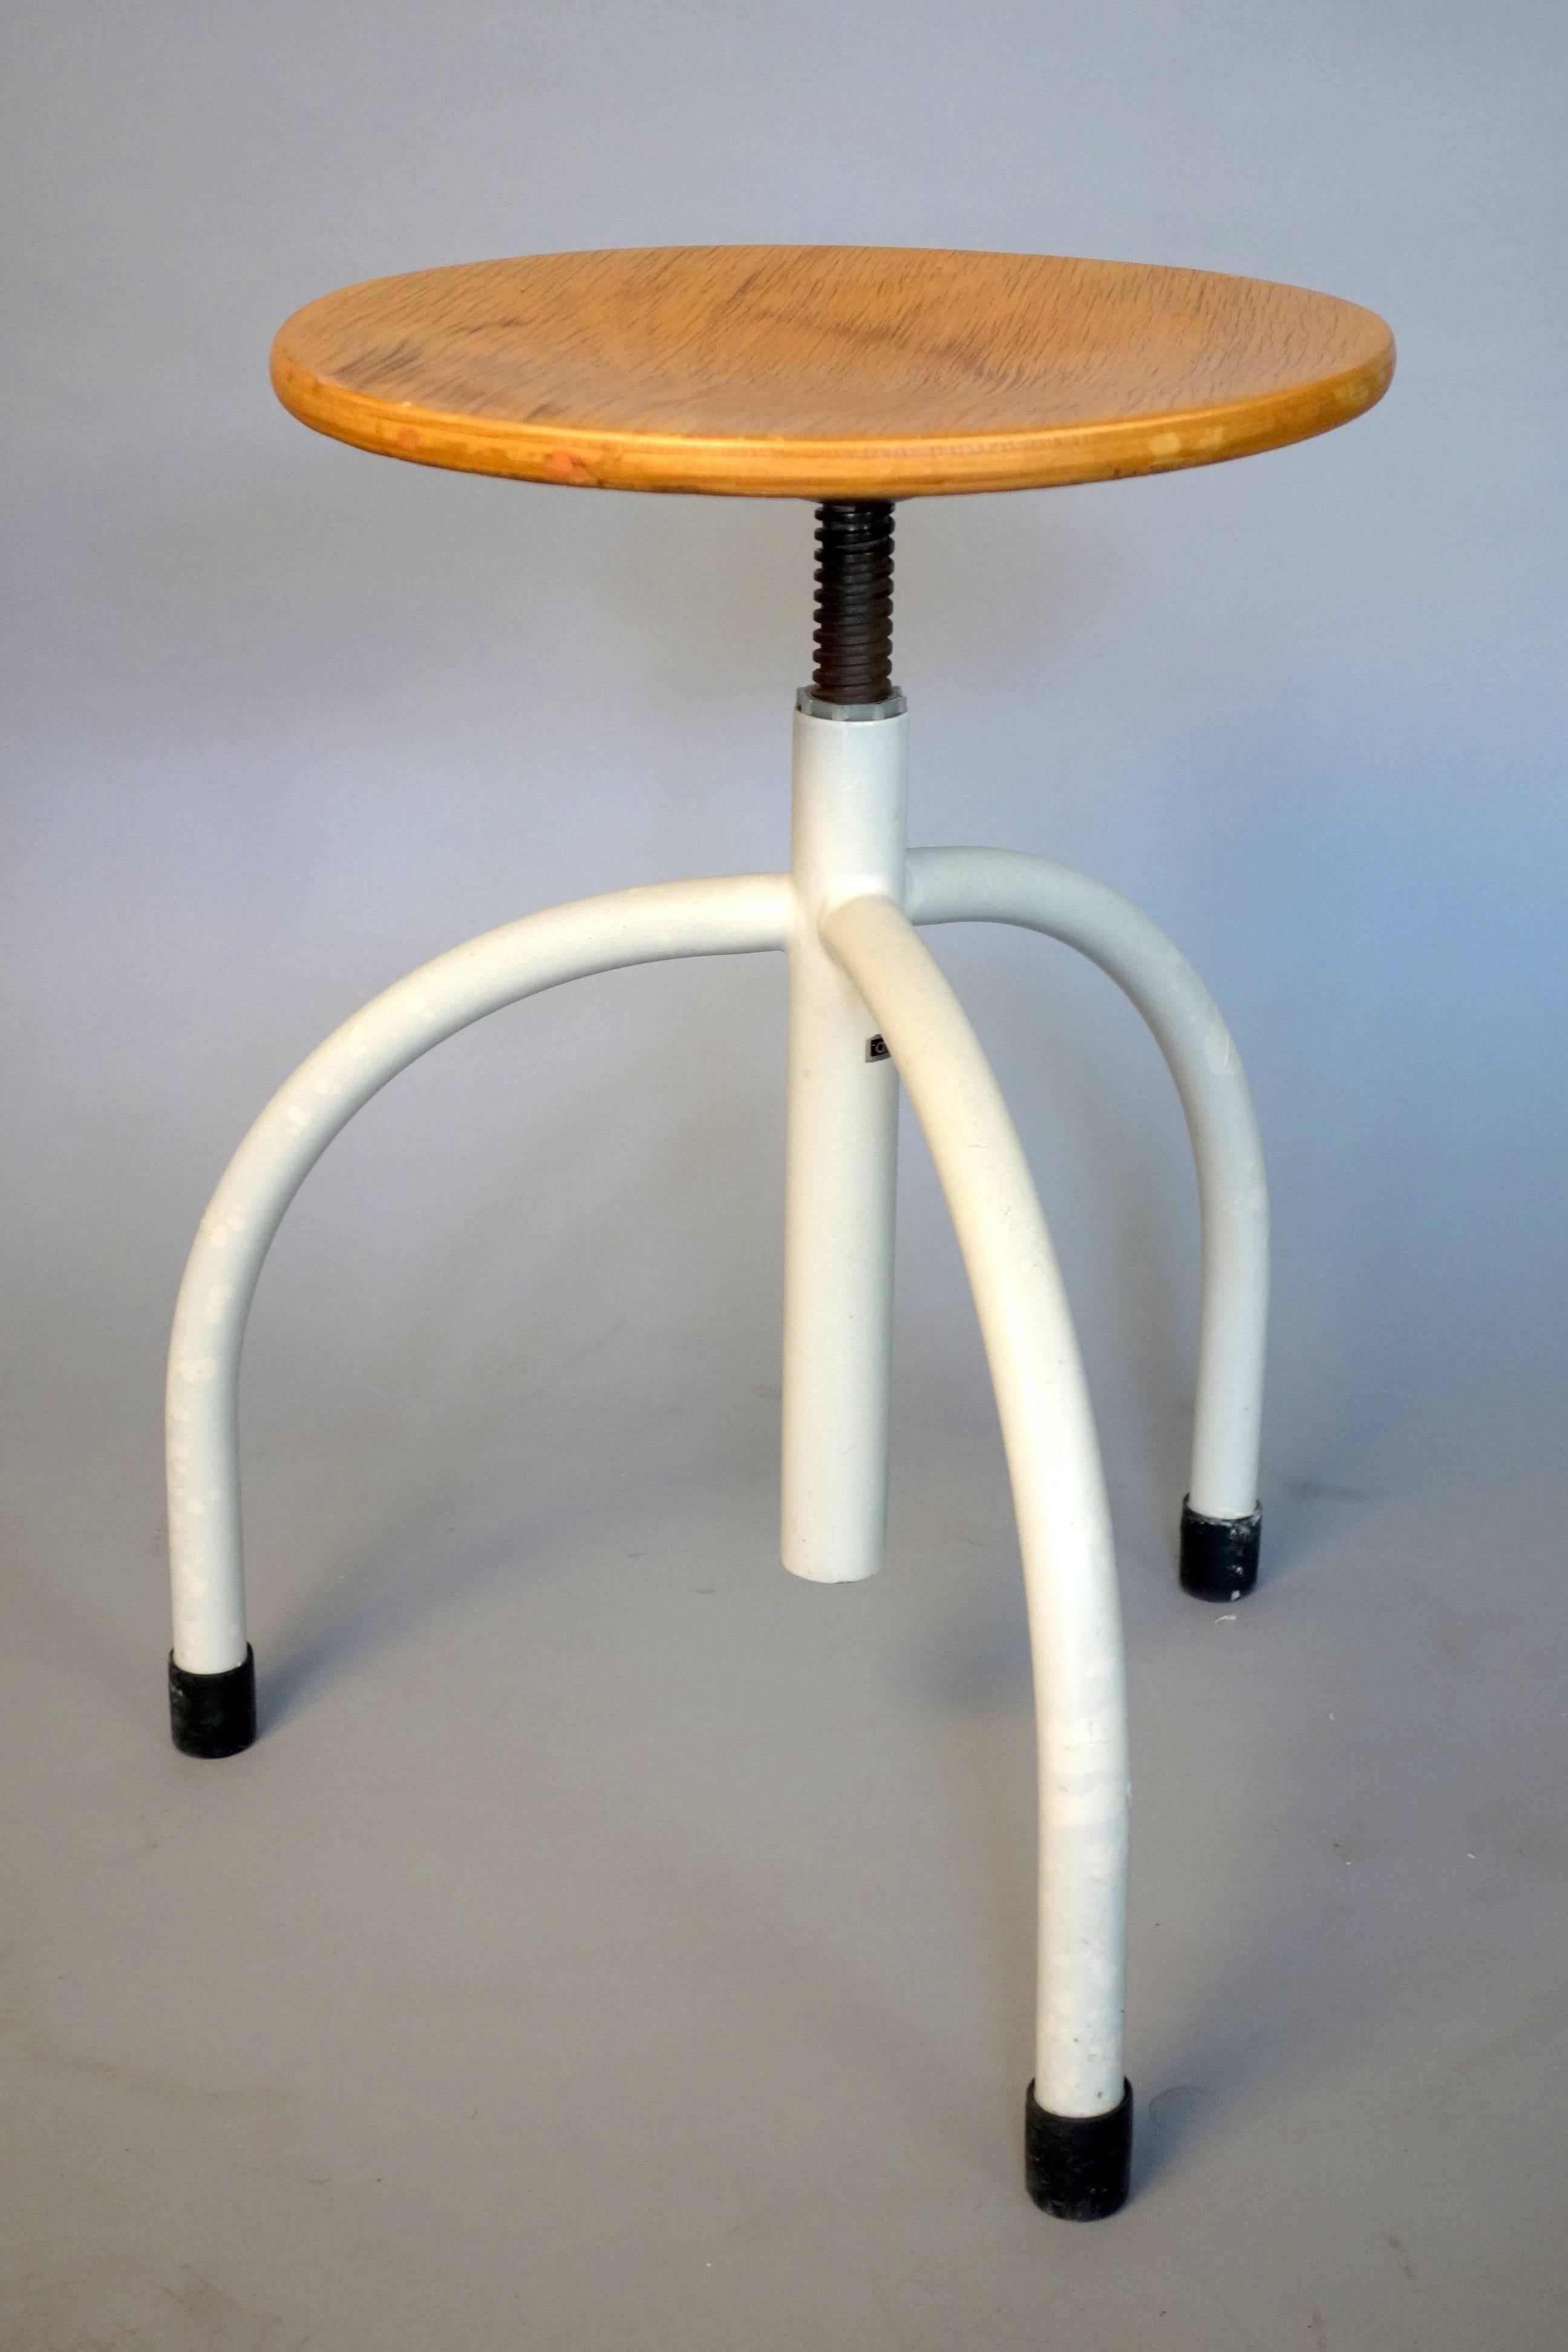 Cor Alons (Dutch, 1892-1967) was a versatile designer / artist / professor who worked in every medium imaginable. This pair of stools was made in the Netherlands by Oostwoud, the company for whom Alons contributed his most innovative and well-known